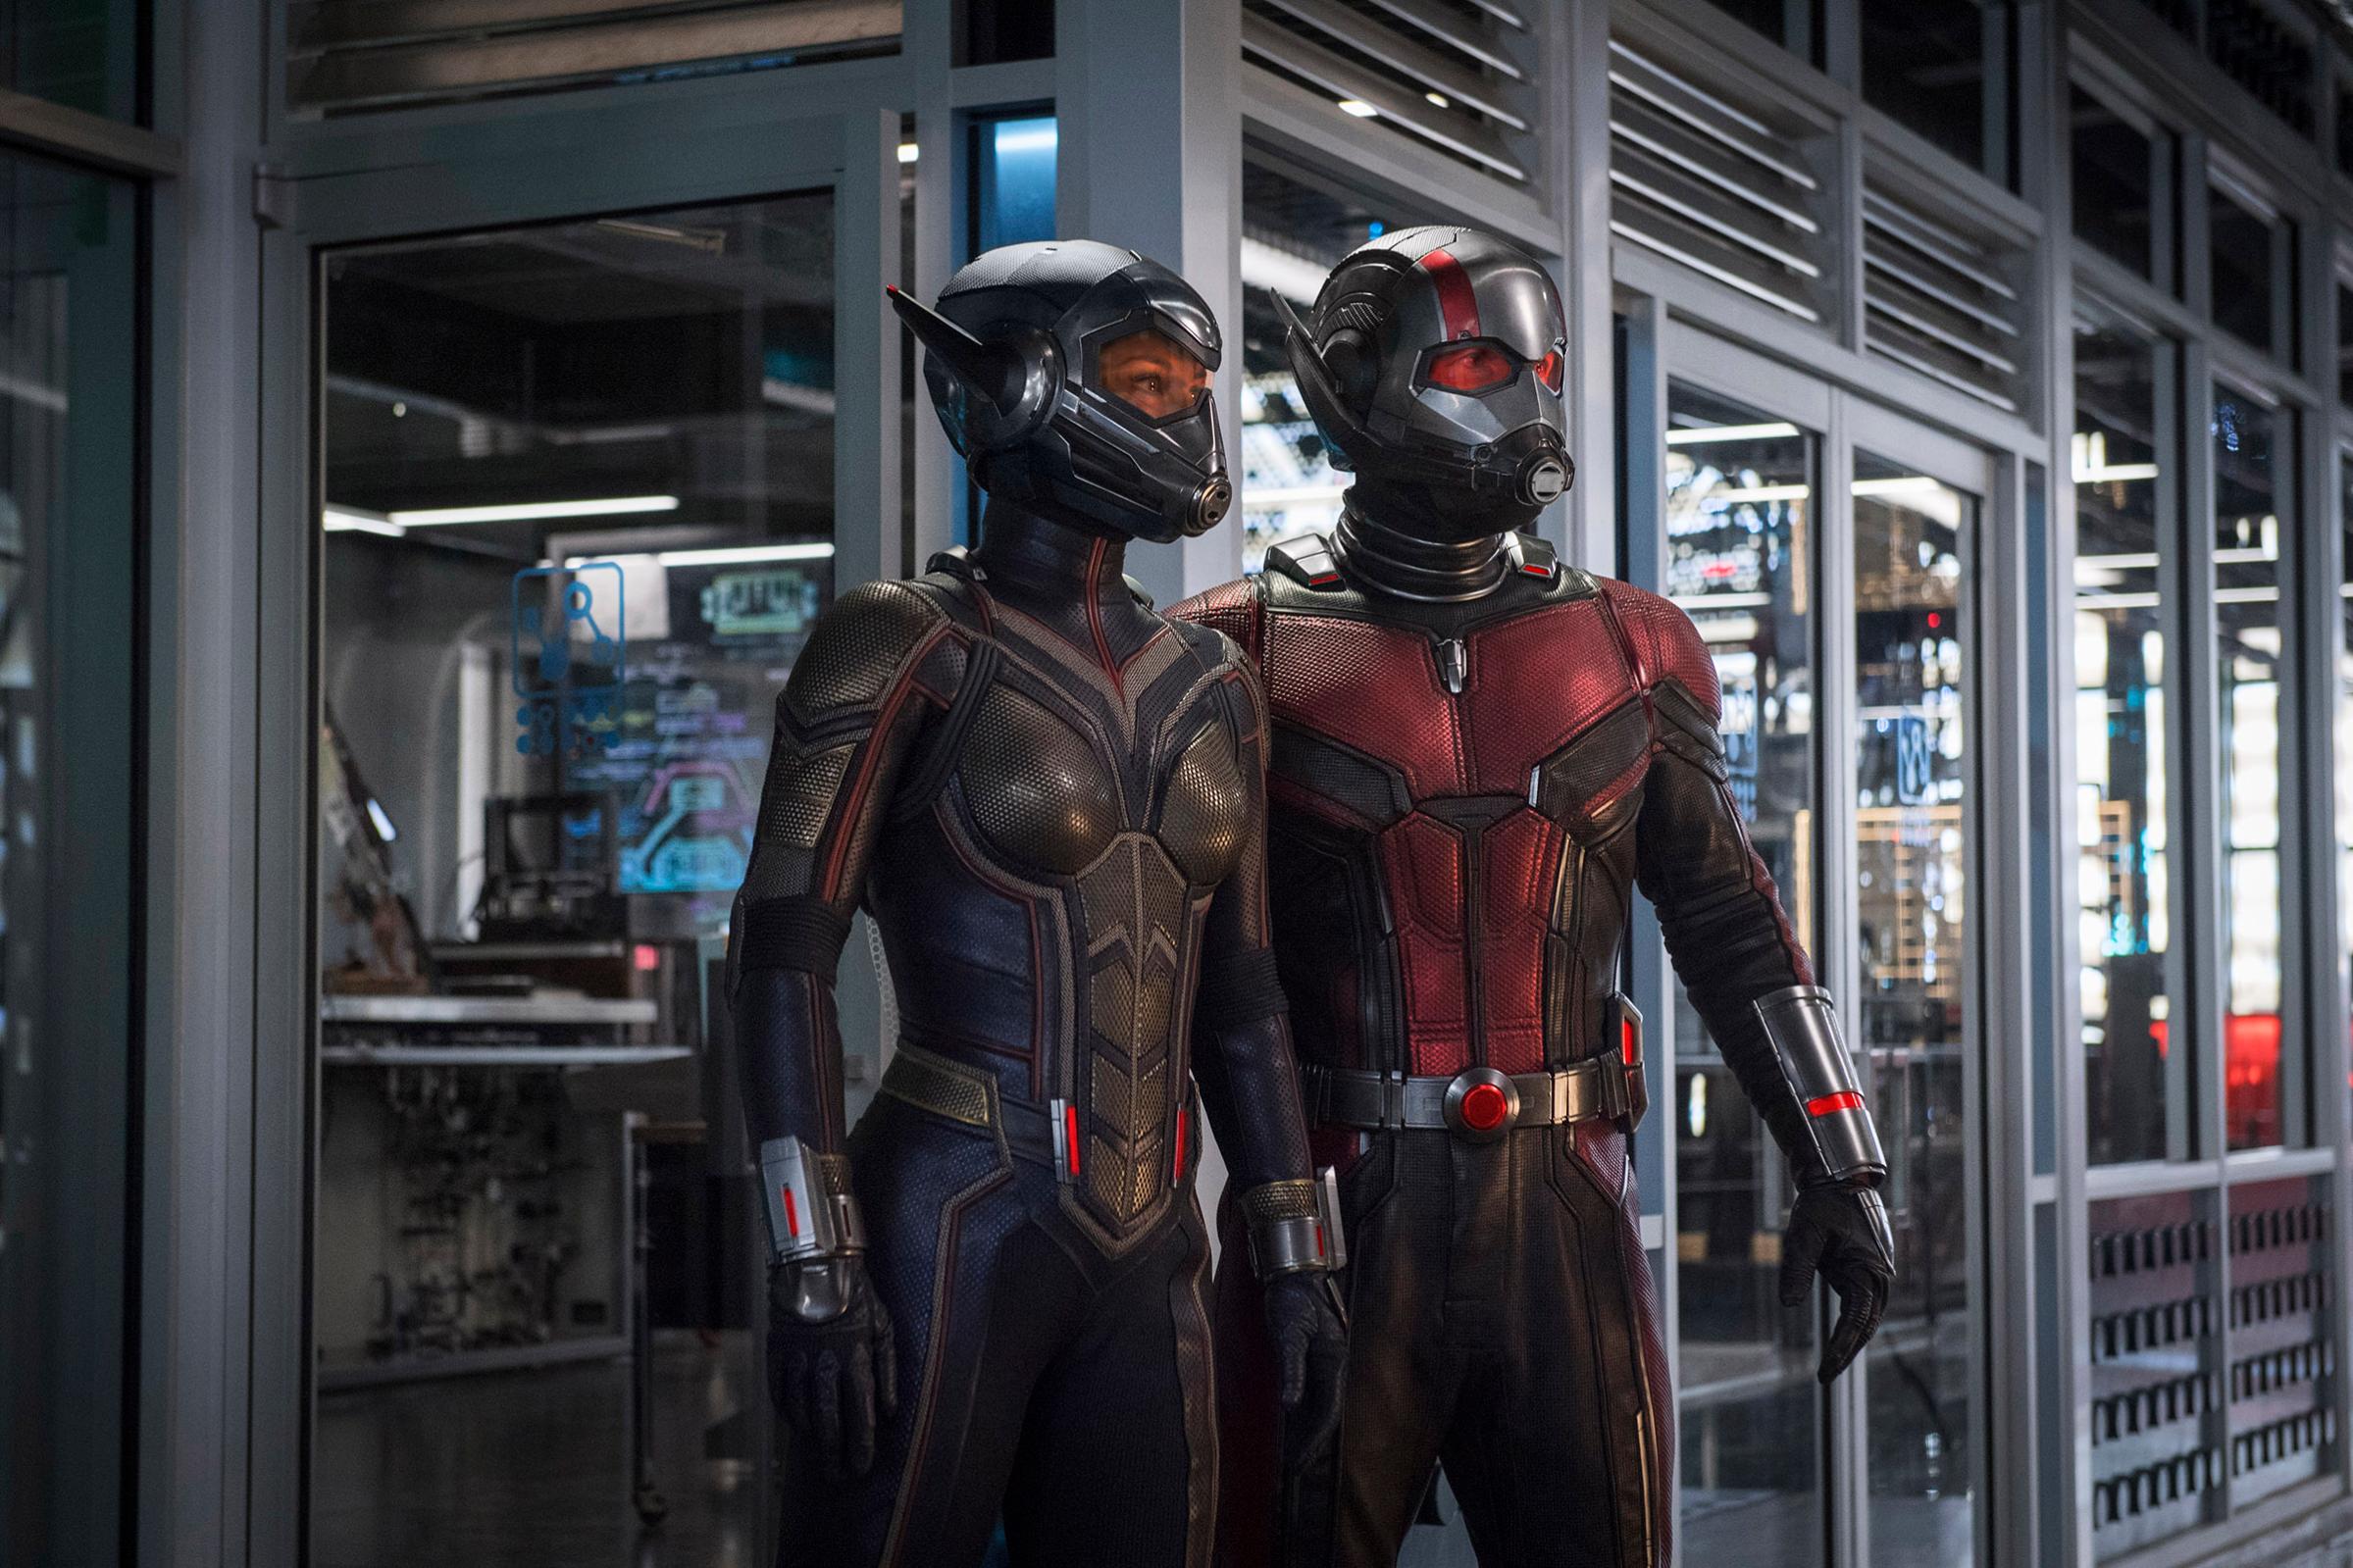 Paul Rudd and Evangeline Lilly in “Ant-Man and the Wasp”.